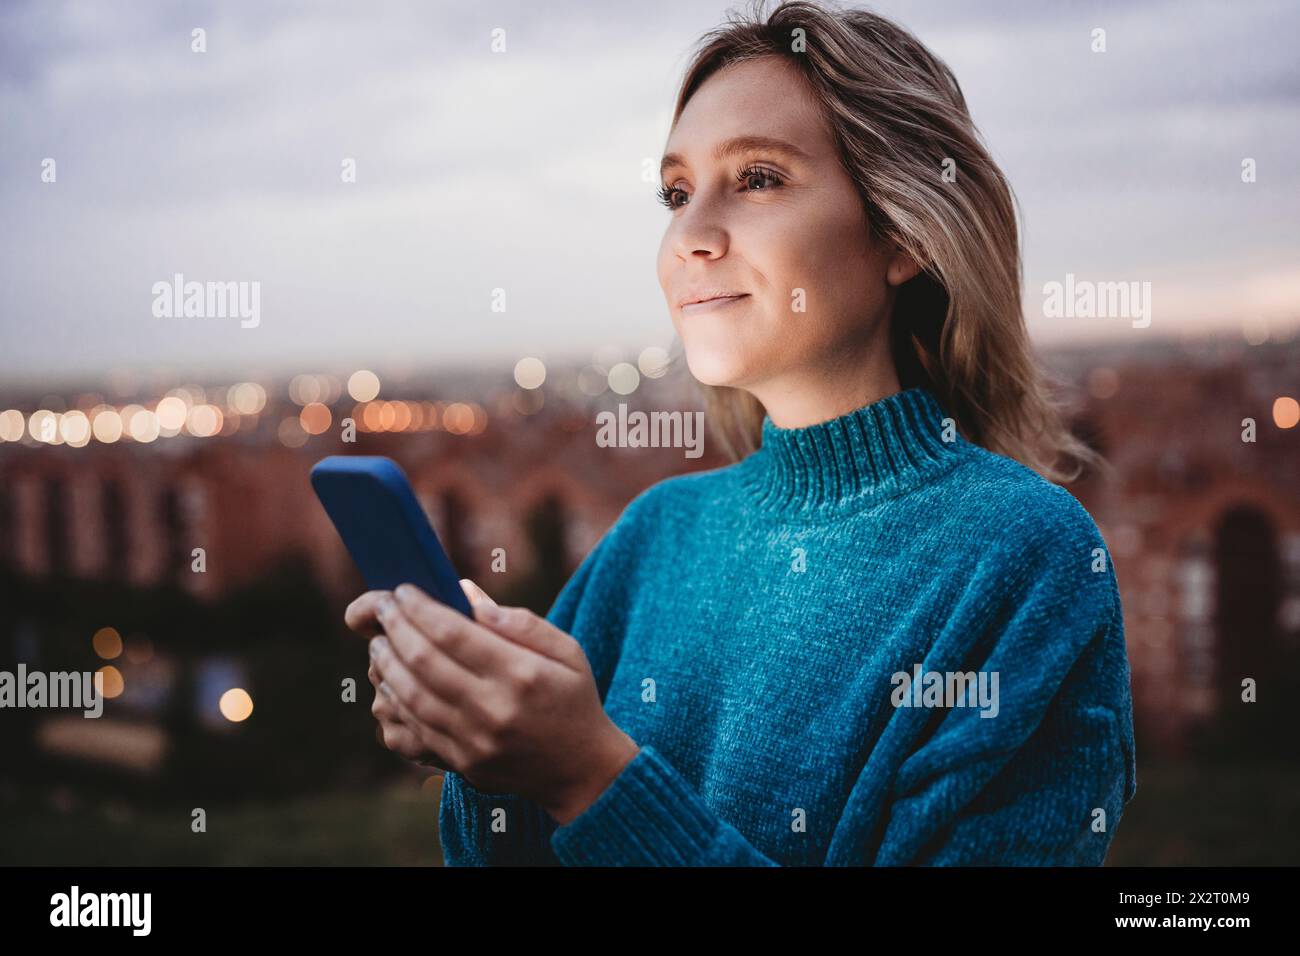 Woman holding smart phone and day dreaming at dusk Stock Photo